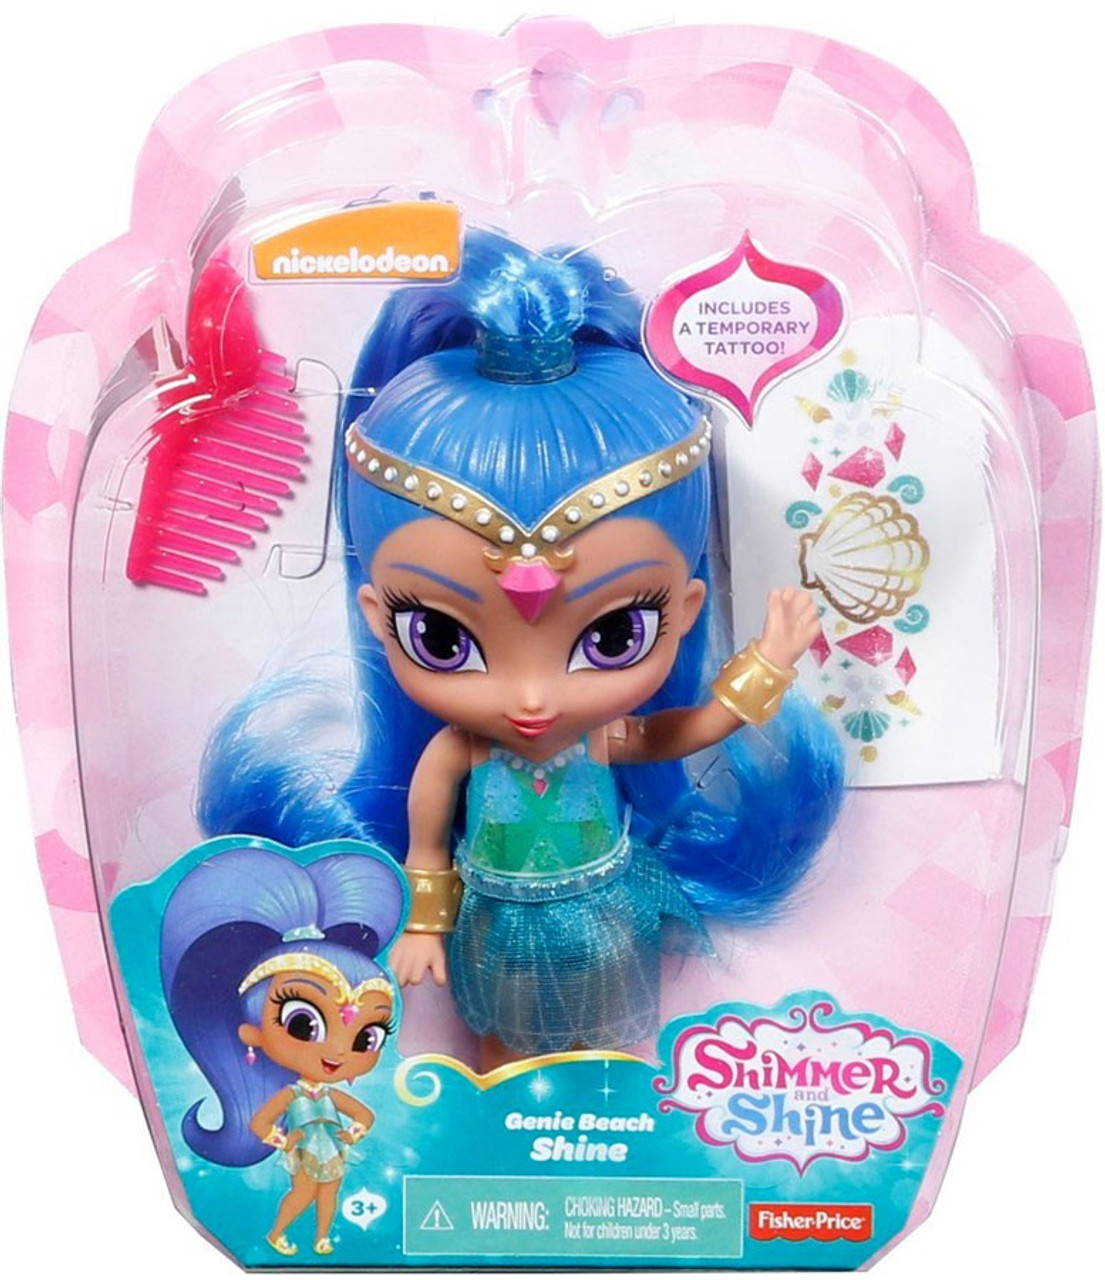 fisher price shimmer and shine doll